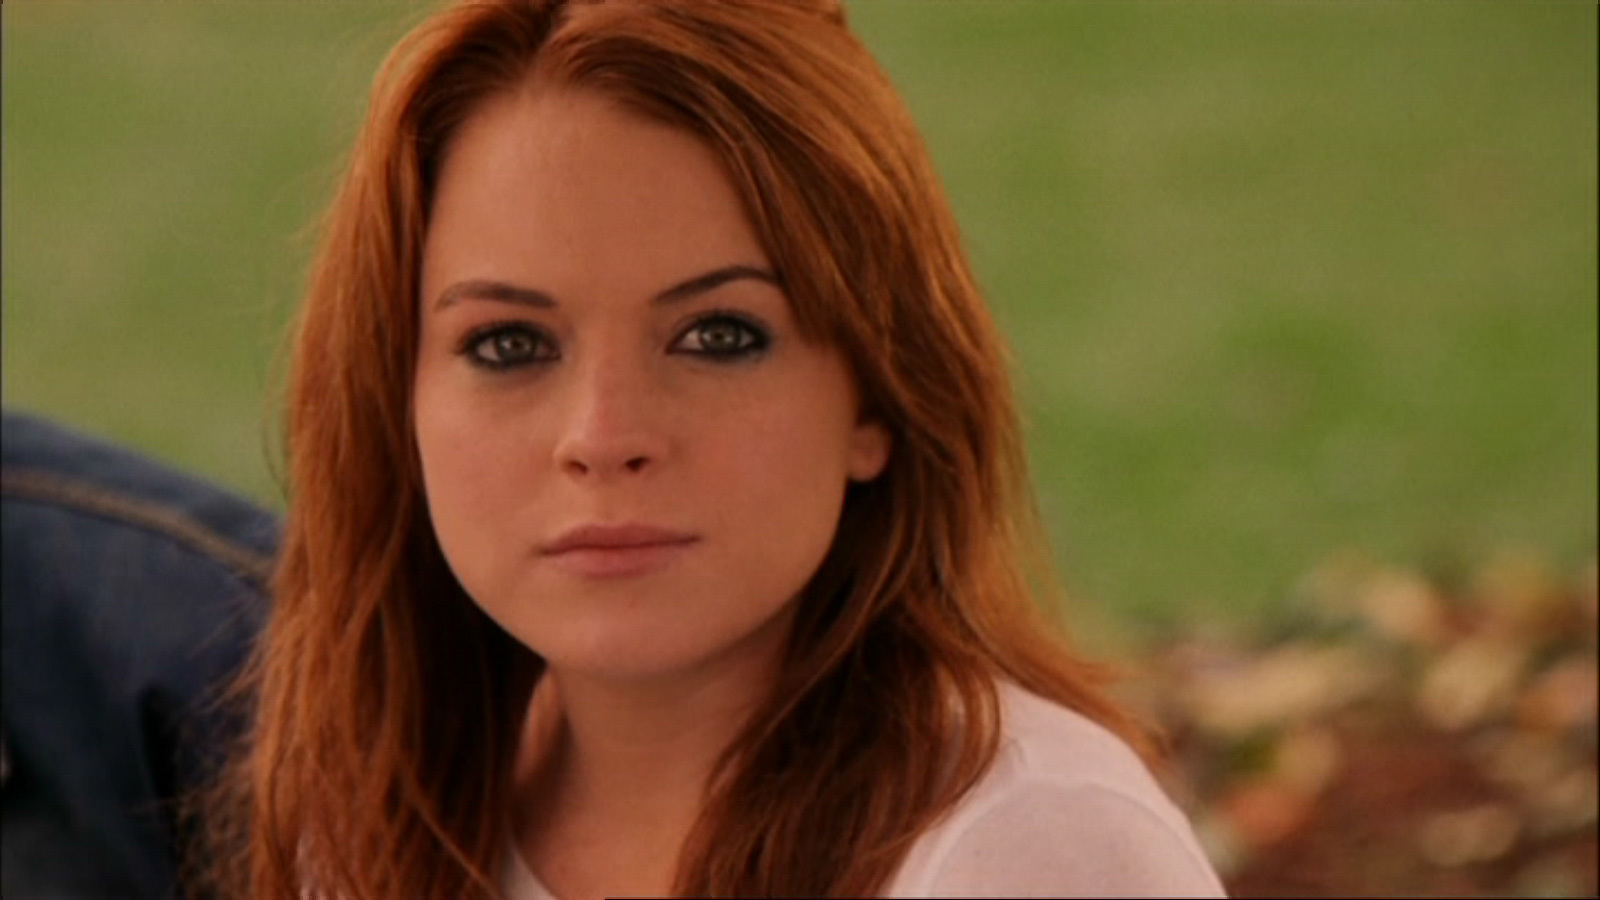 Cady From Mean Girls Quotes. QuotesGram